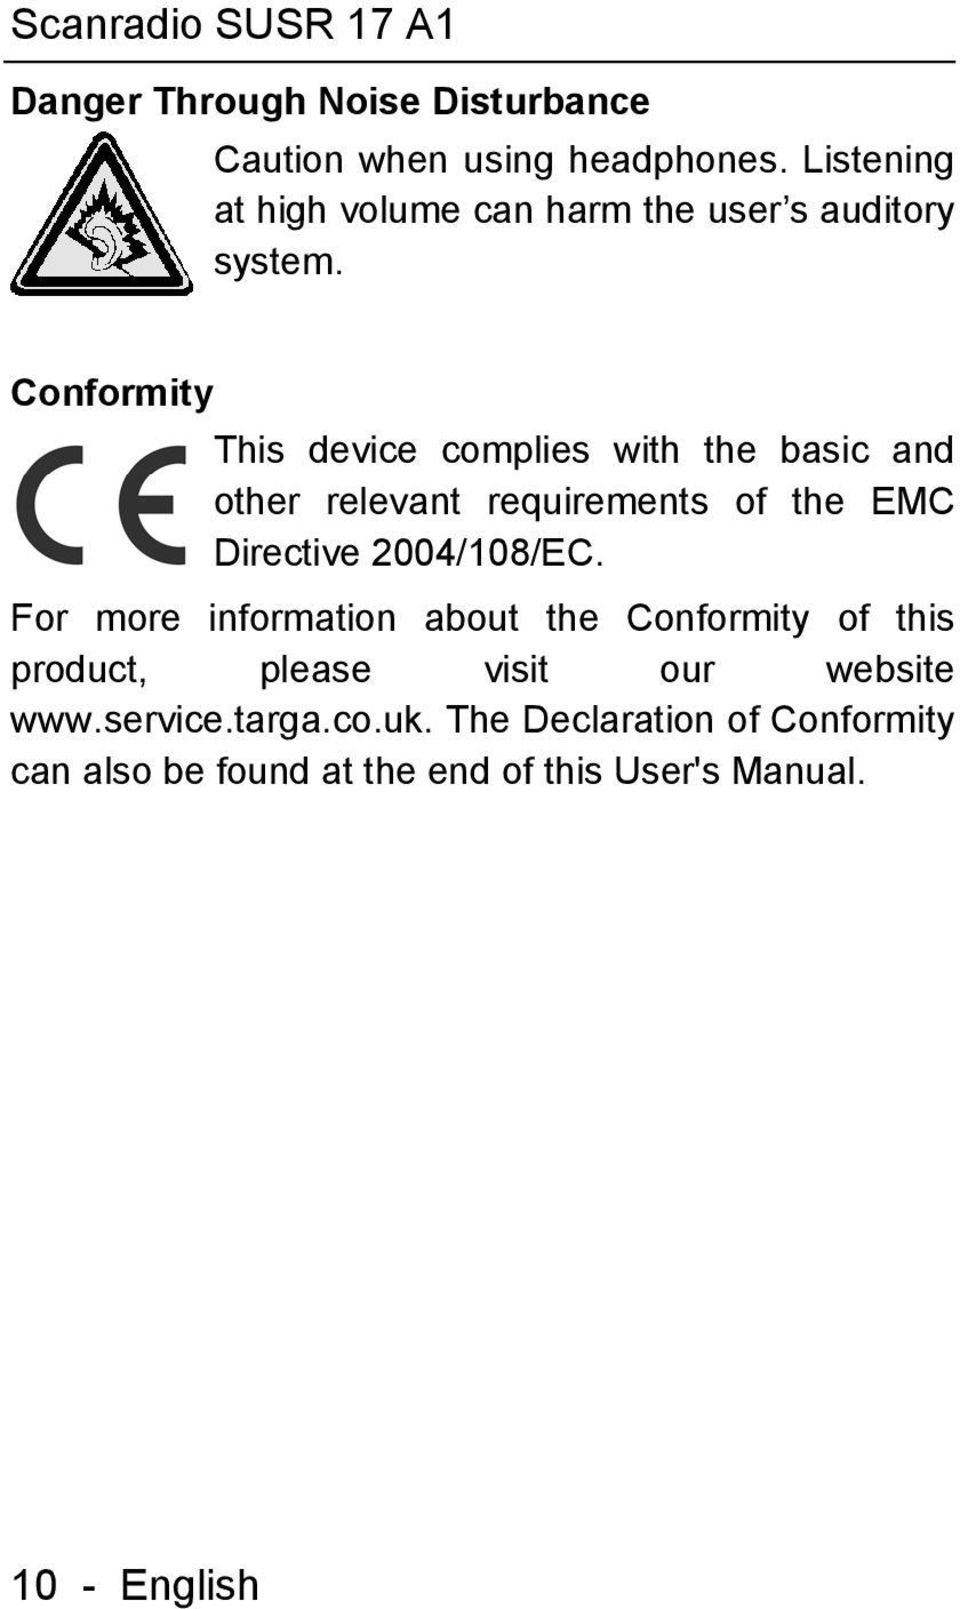 Conformity This device complies with the basic and other relevant requirements of the EMC Directive